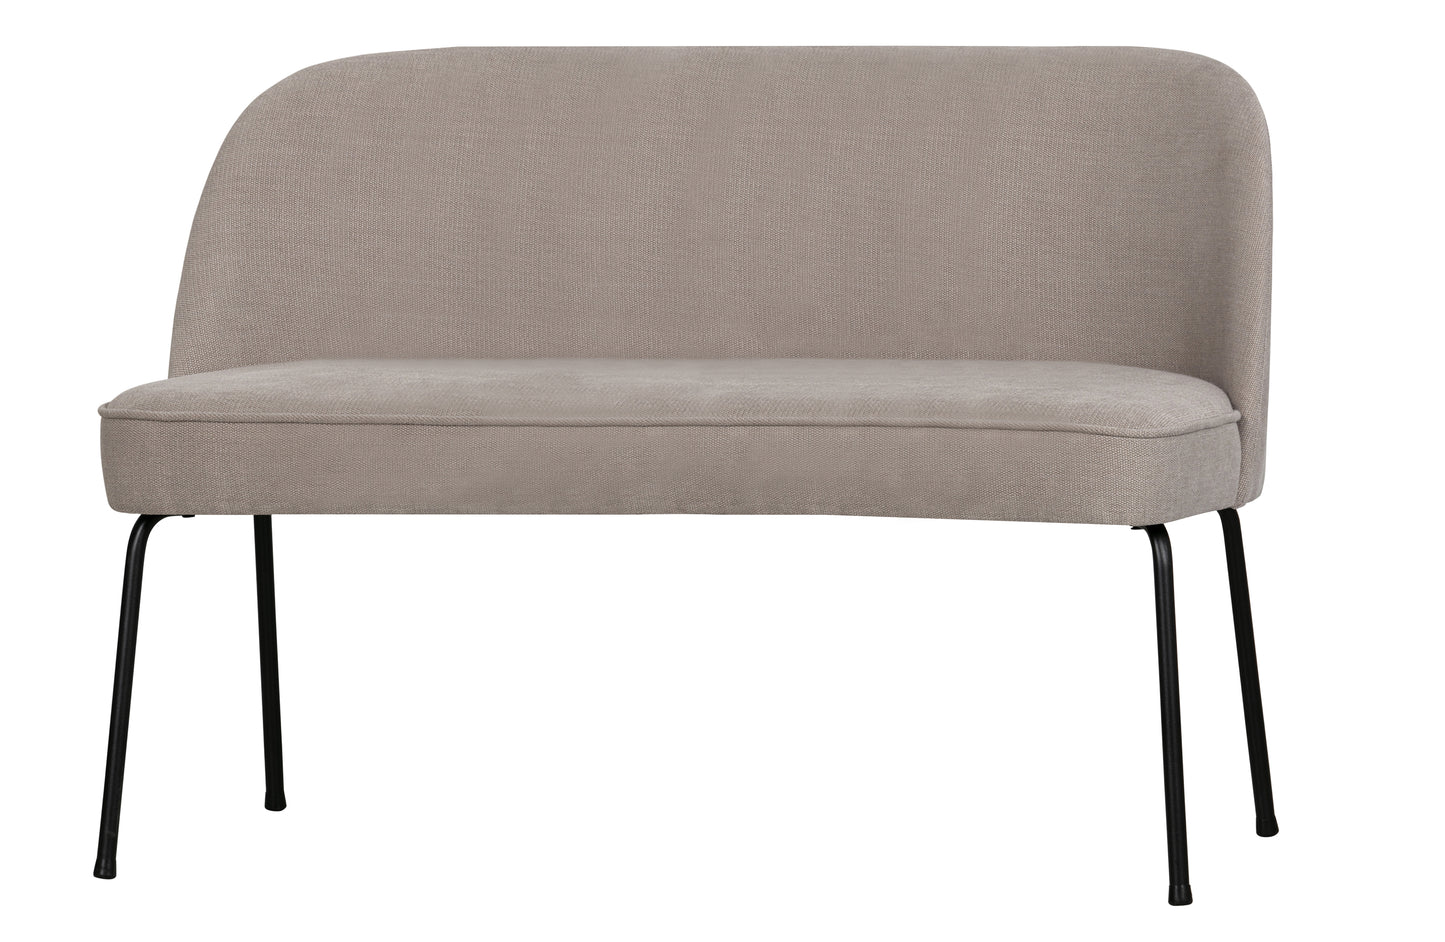 Vogue Dining Bench Woven Fabric Sand